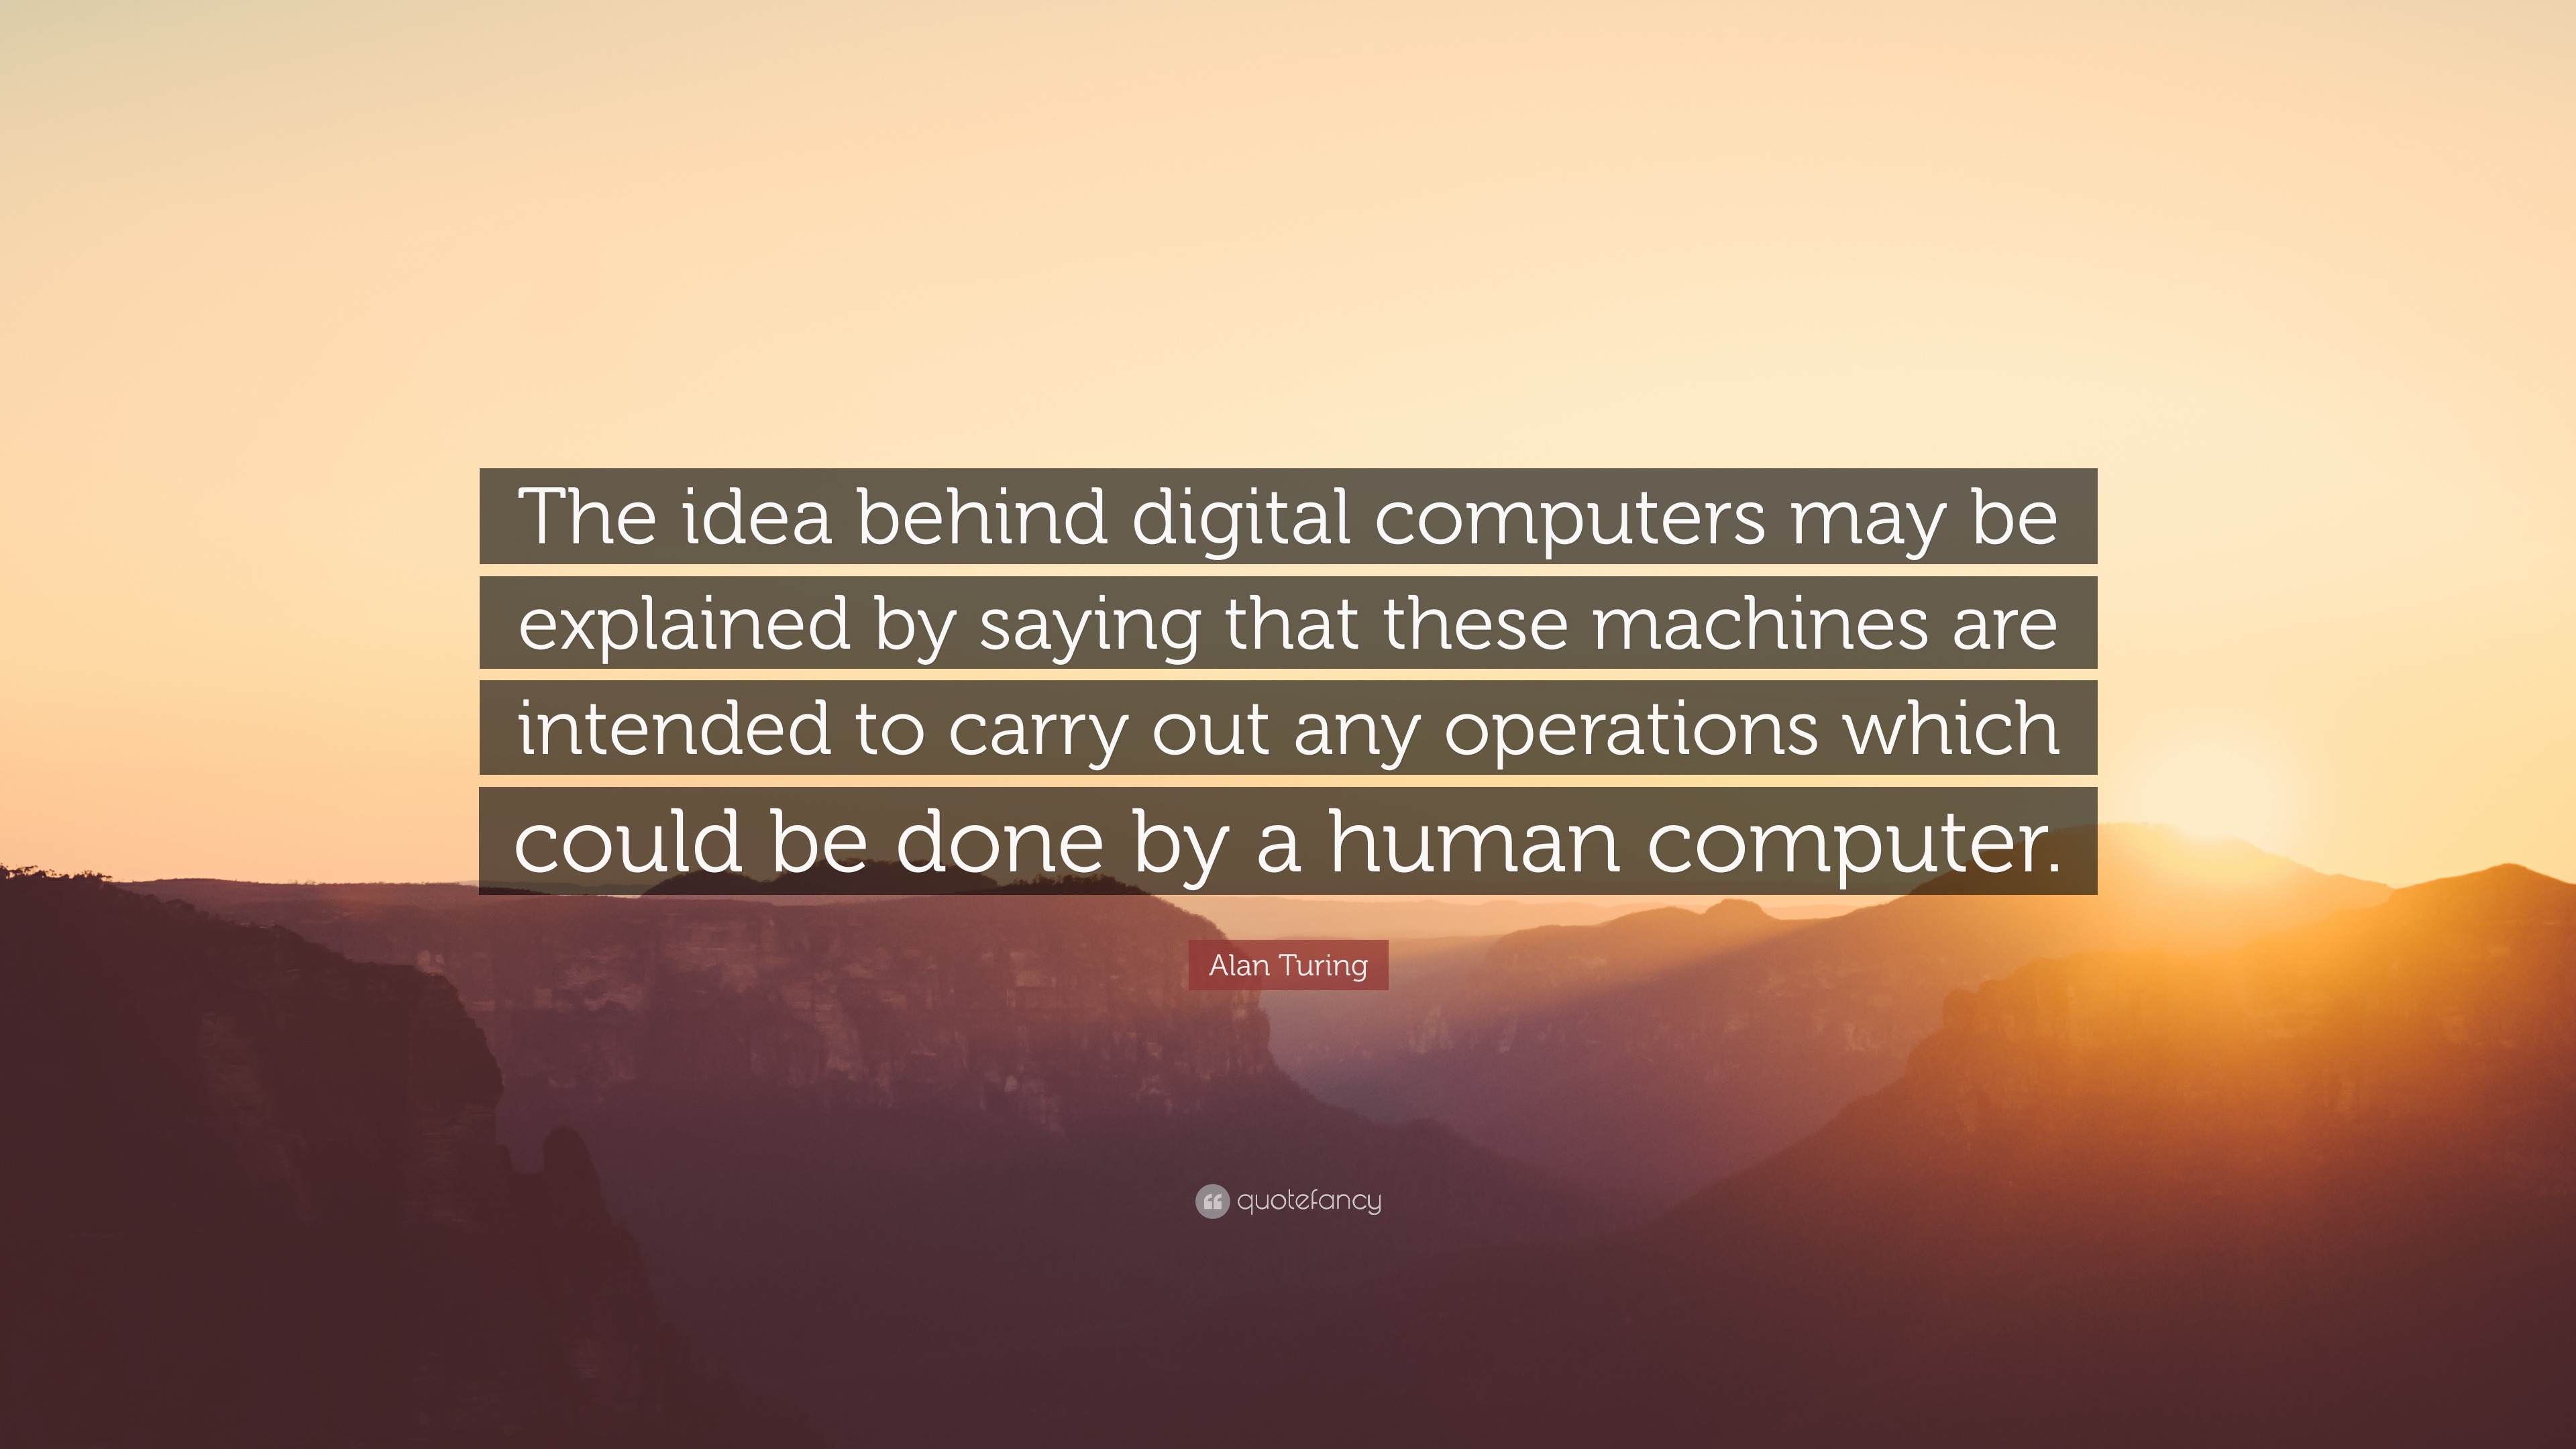 Txt Universe Explained - Alan Turing Quote: "The idea behind digital computers may ...